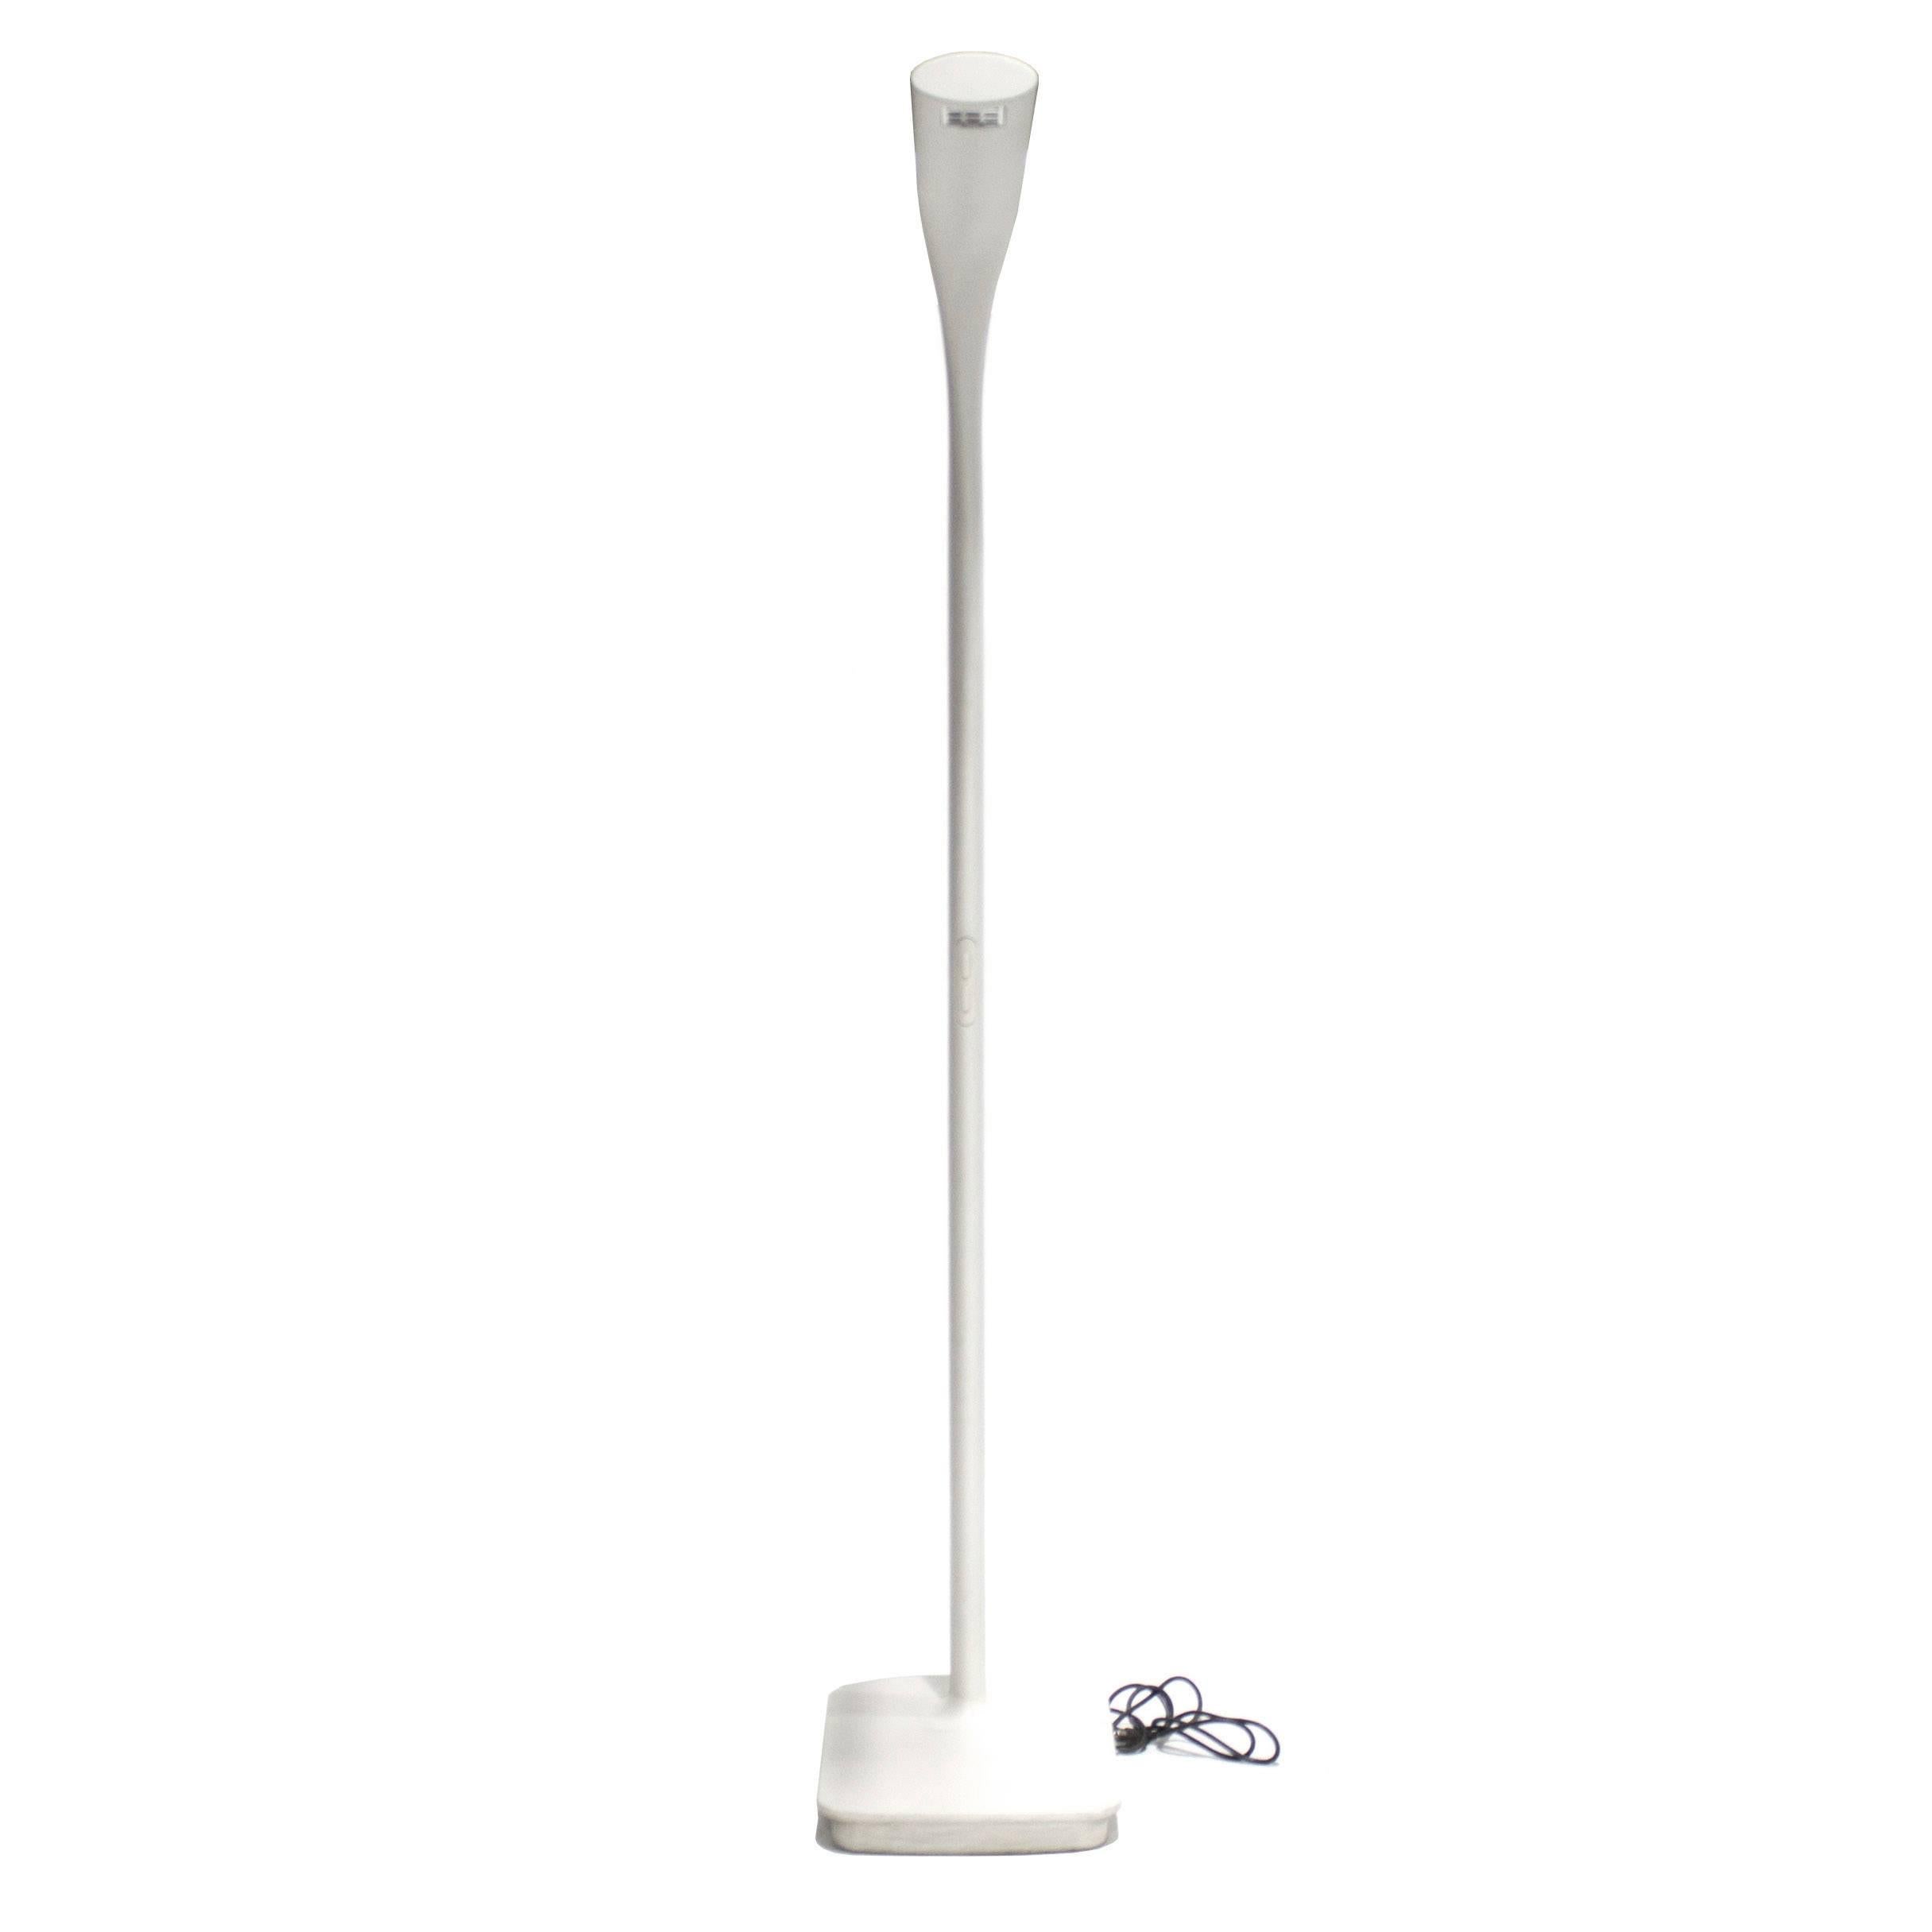 Illiria Floor Lamp by Ernesto Gismondi for Artemide, Italy Modern In Good Condition For Sale In Brooklyn, NY